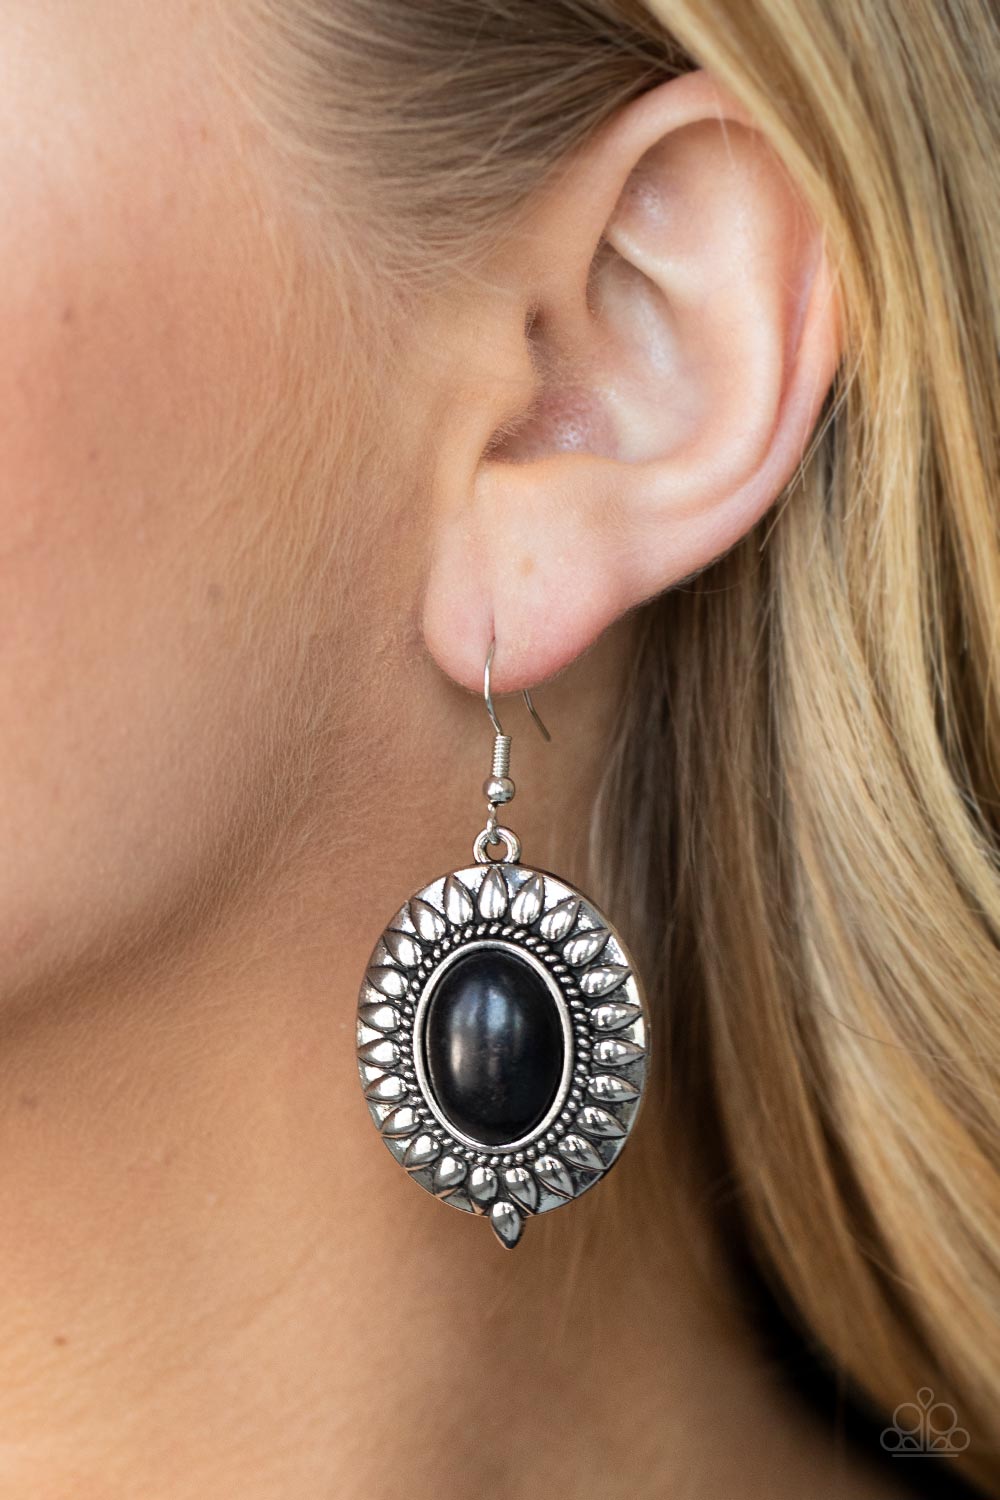 Rustic silver petals fan out from an oval black stone center, creating an earthy floral frame. Earring attaches to a standard fishhook fitting.  Sold as one pair of earrings.